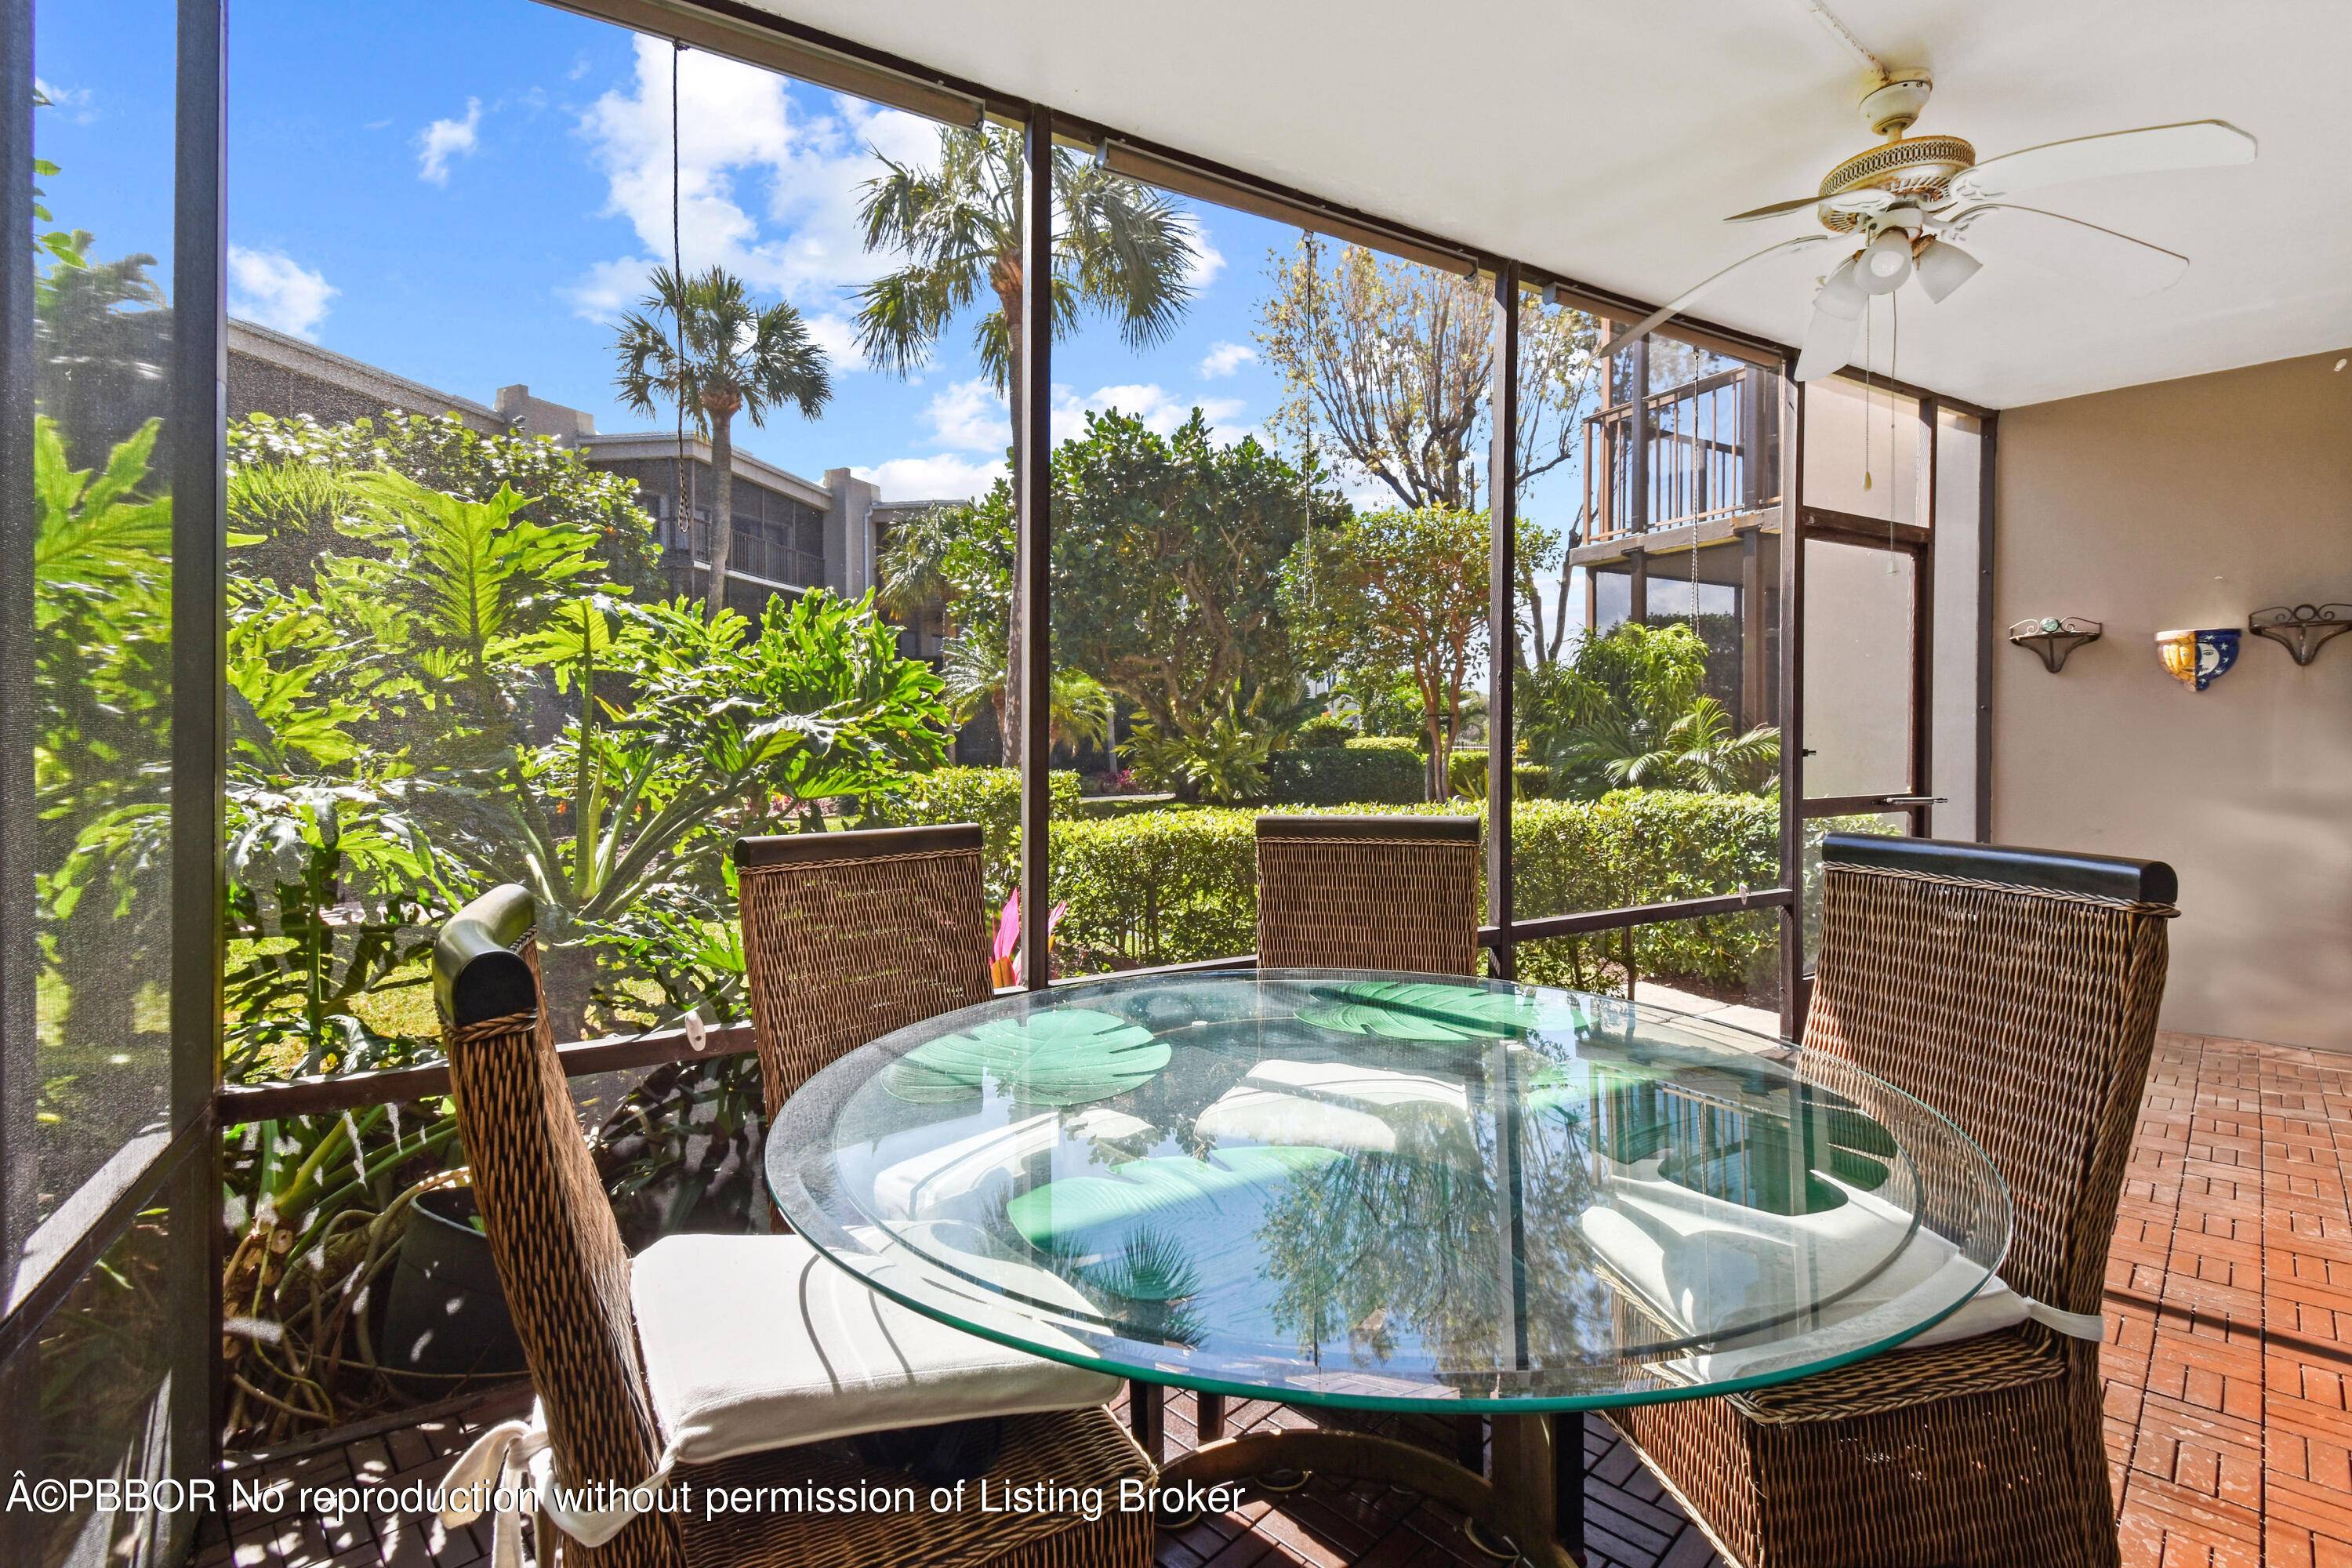 Beautiful Lanai apartment, well appointed with nice garden views, two bedrooms, 2 baths, open kitchen, impeccable and on a great location in Palm Beach, Eau Hotel and Spa Raymond Floyd ...